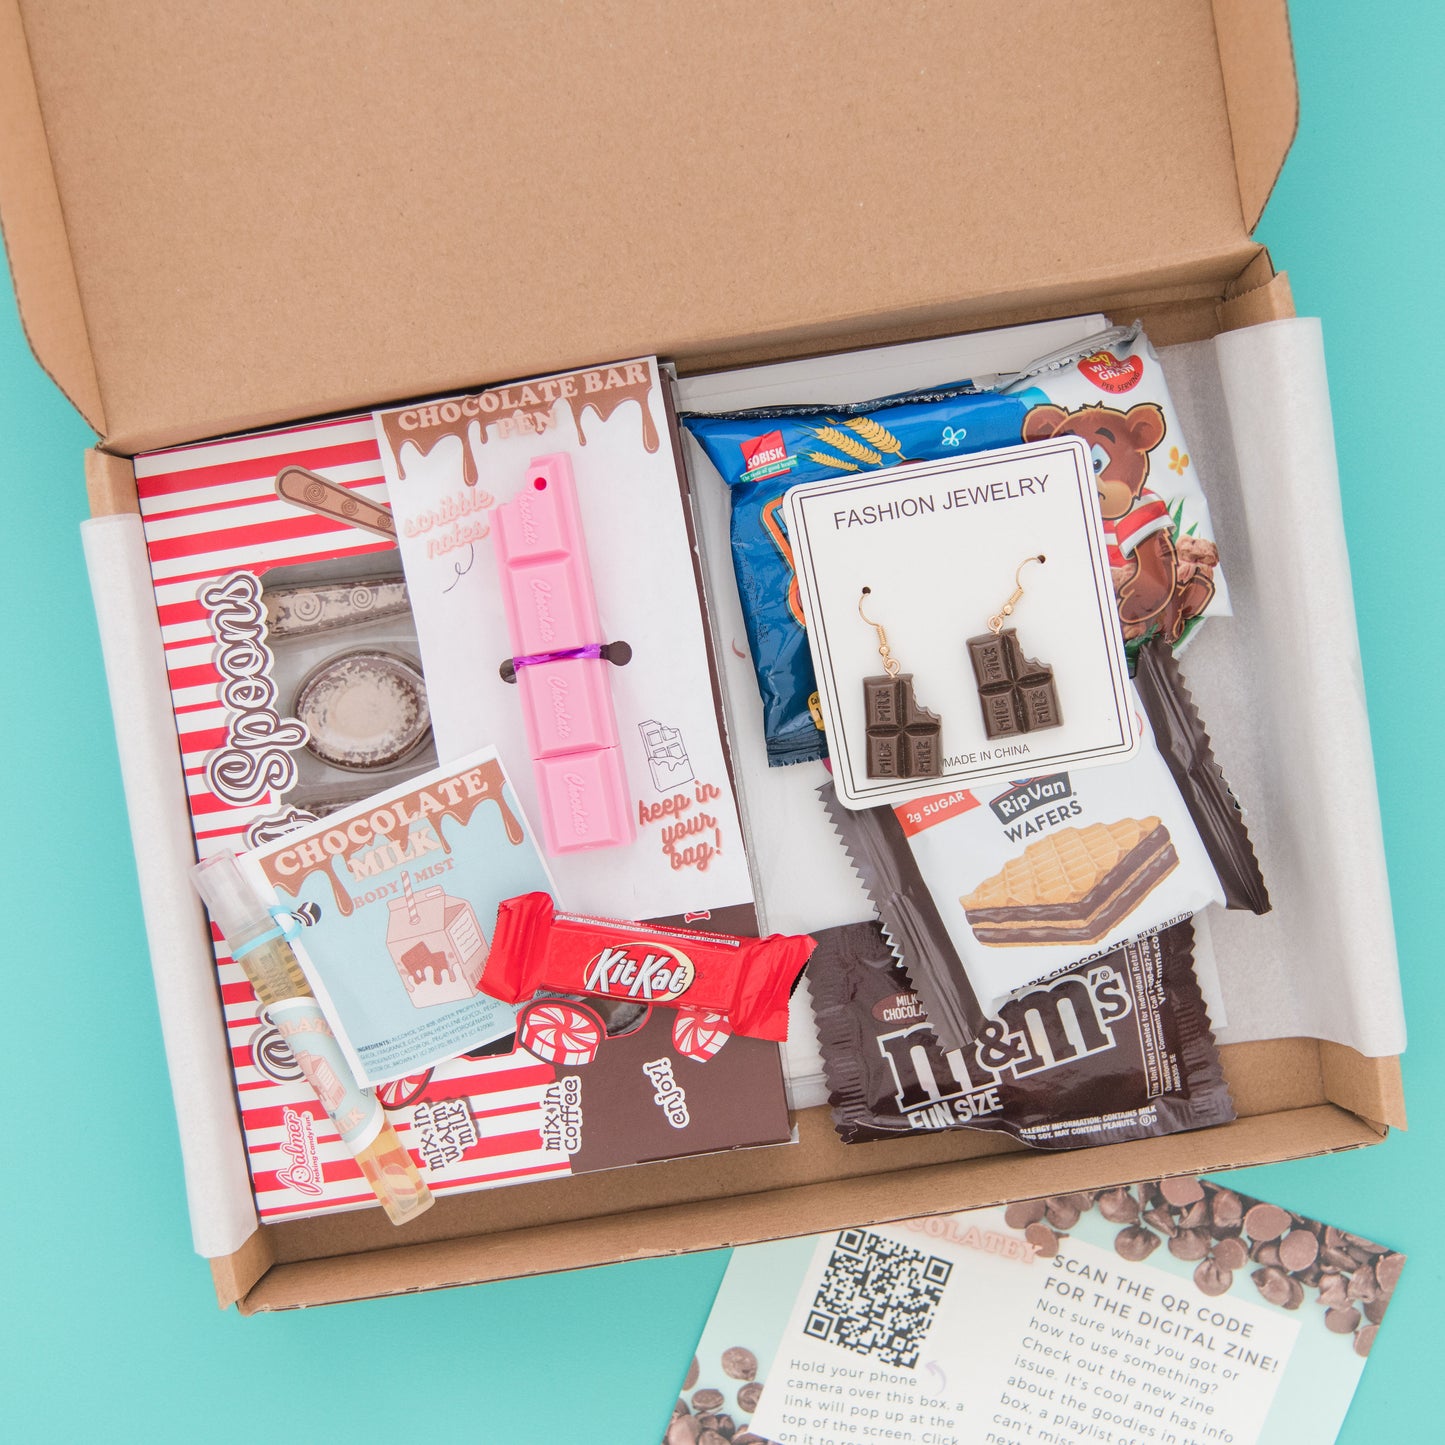 Get Your Odd On: 6 Months of The Oddball Club Subscription Box